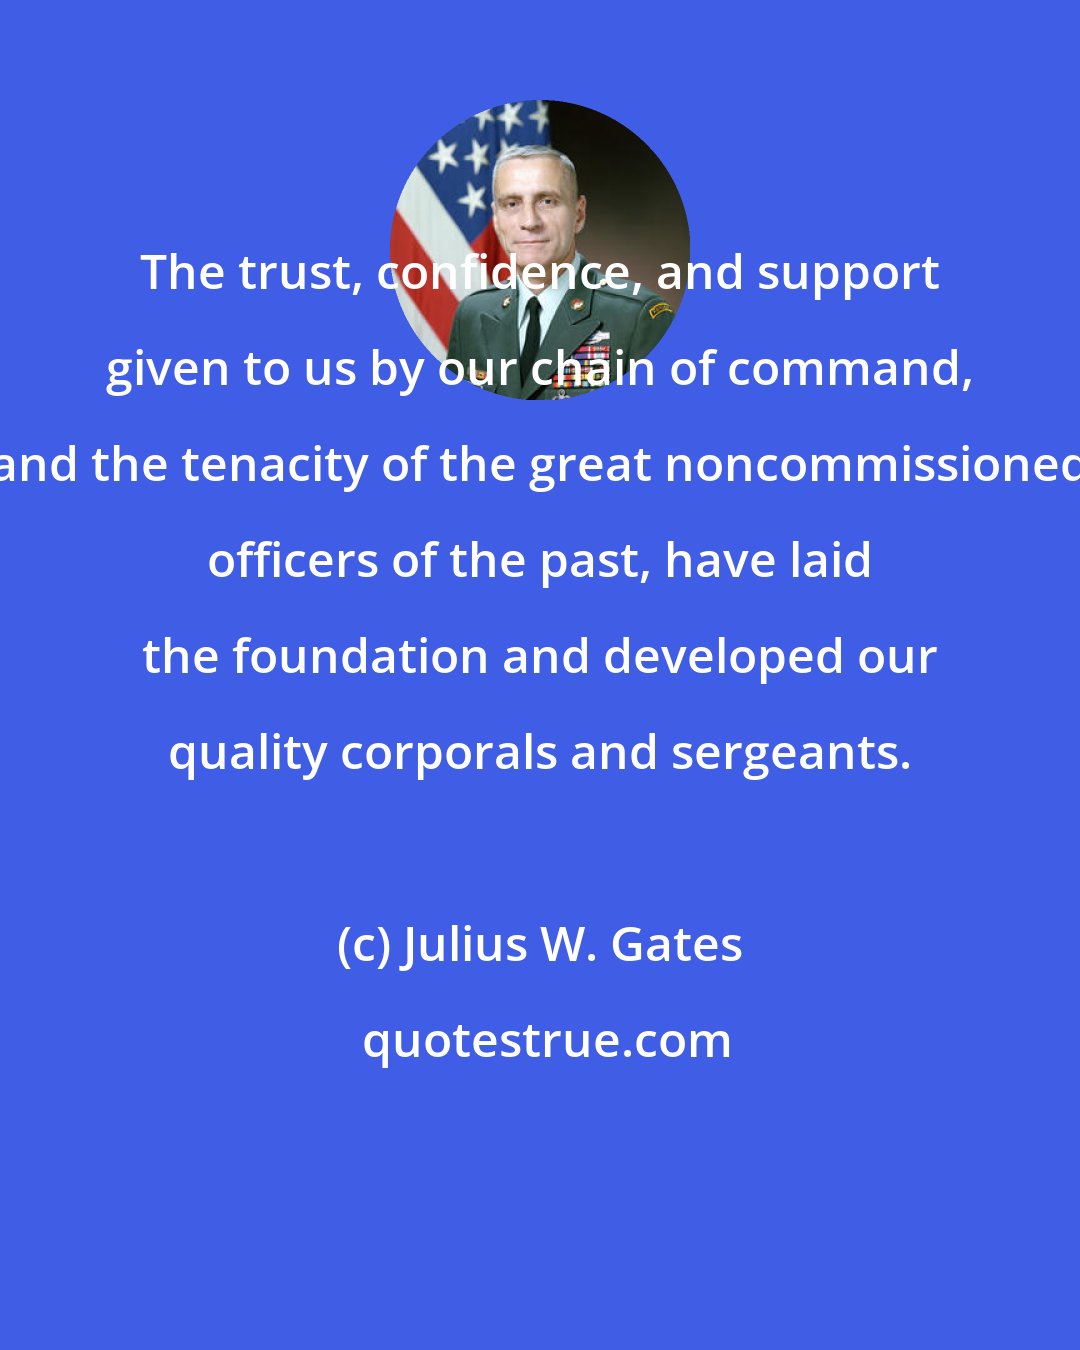 Julius W. Gates: The trust, confidence, and support given to us by our chain of command, and the tenacity of the great noncommissioned officers of the past, have laid the foundation and developed our quality corporals and sergeants.